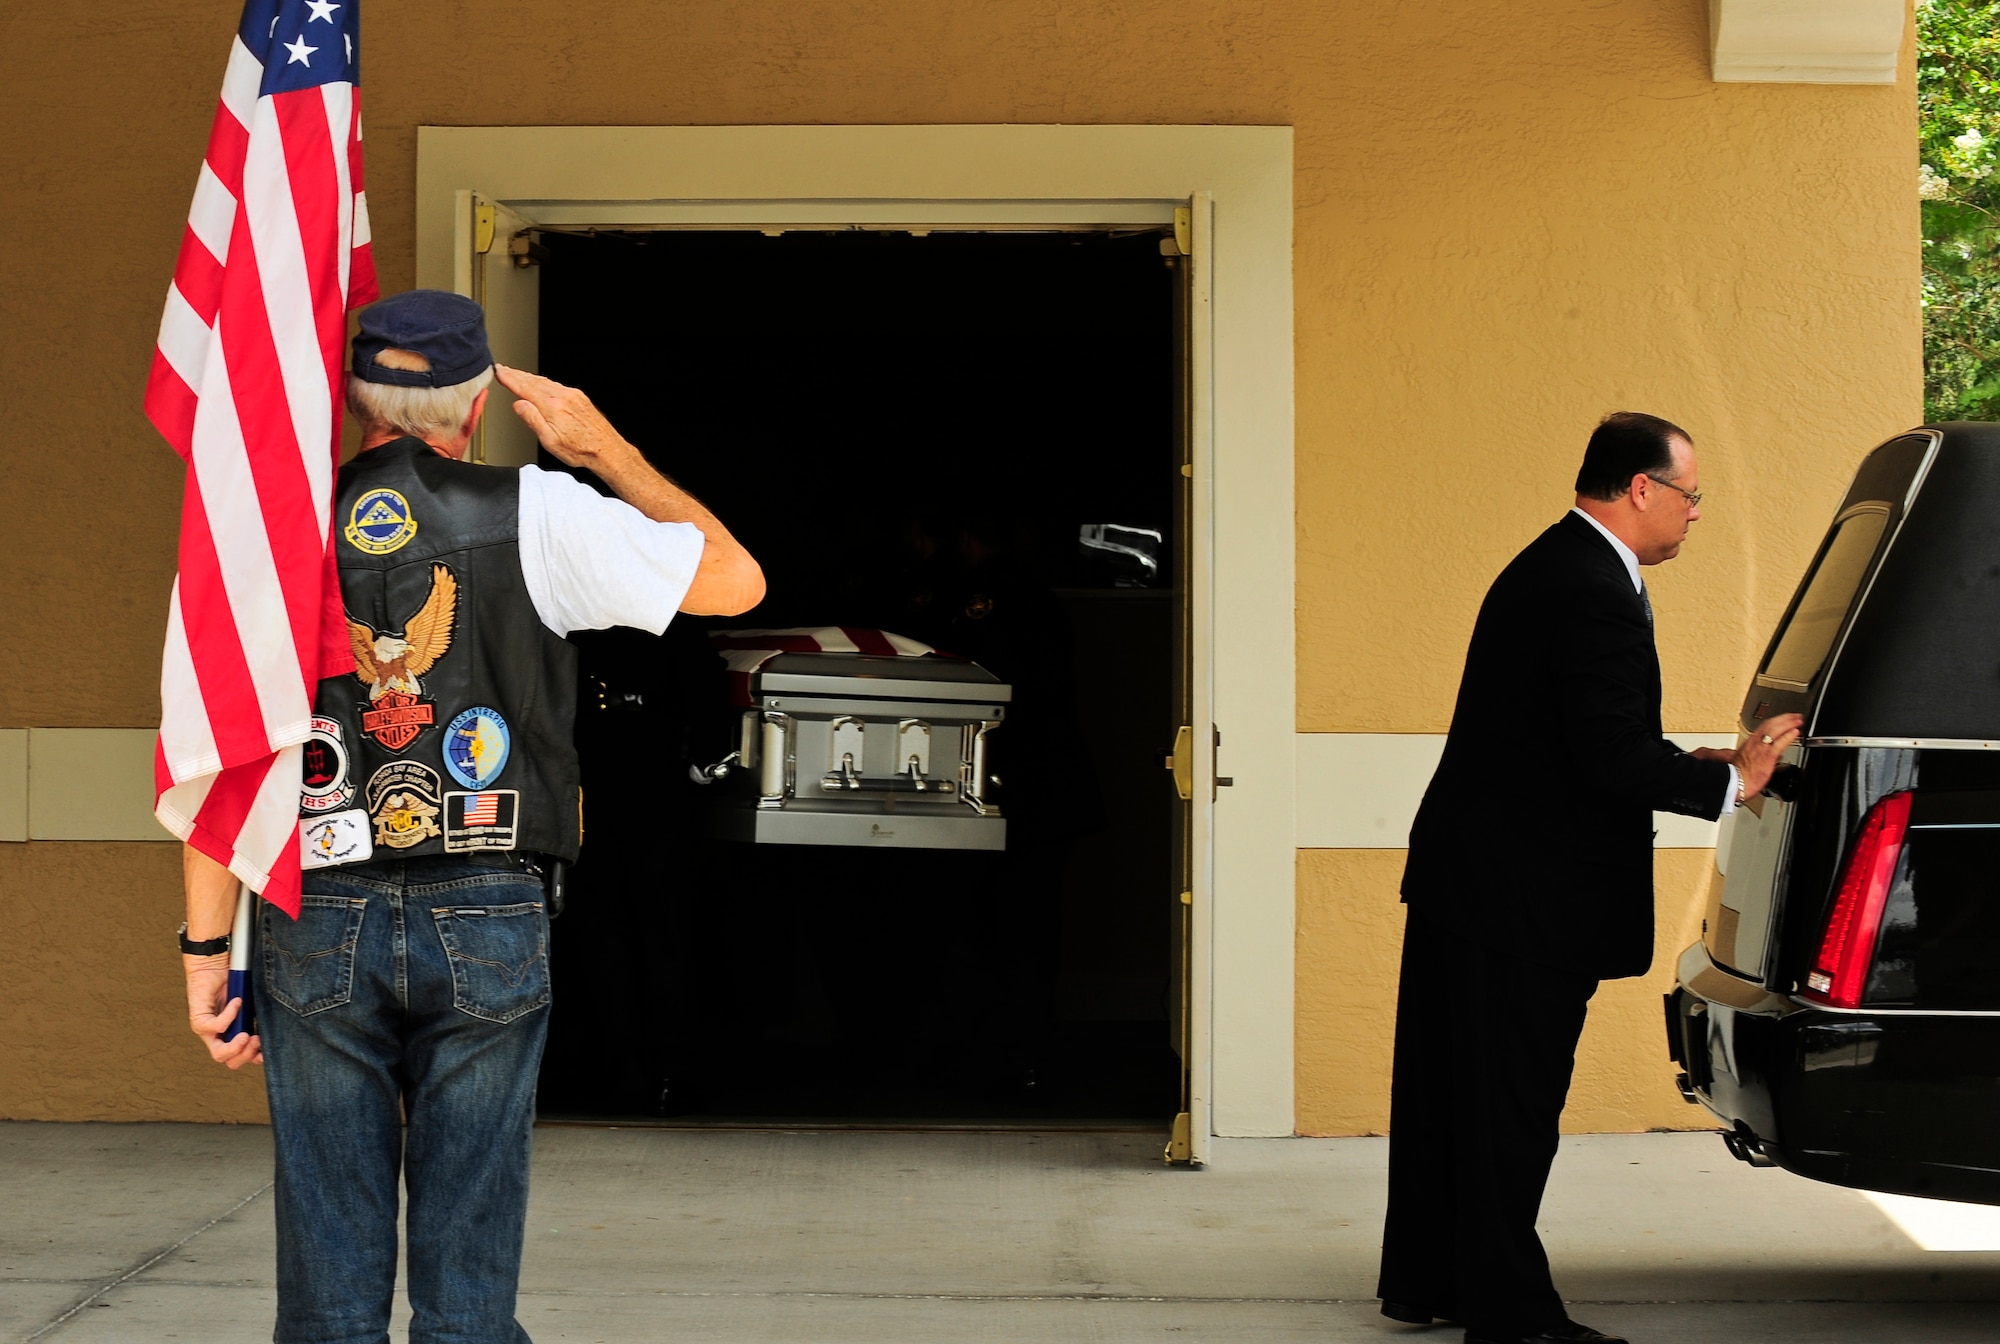 A veteran salutes fallen hero Army Staff Sgt. Ricardo Seija as he is taken into a funeral home July 17, 2012, in Tampa Fla. Seija died July 8, 2012. The 31-year-old Soldier is survived by his widow and a young son. (U.S. Air Force photo by Staff Sgt. Angela Ruiz)